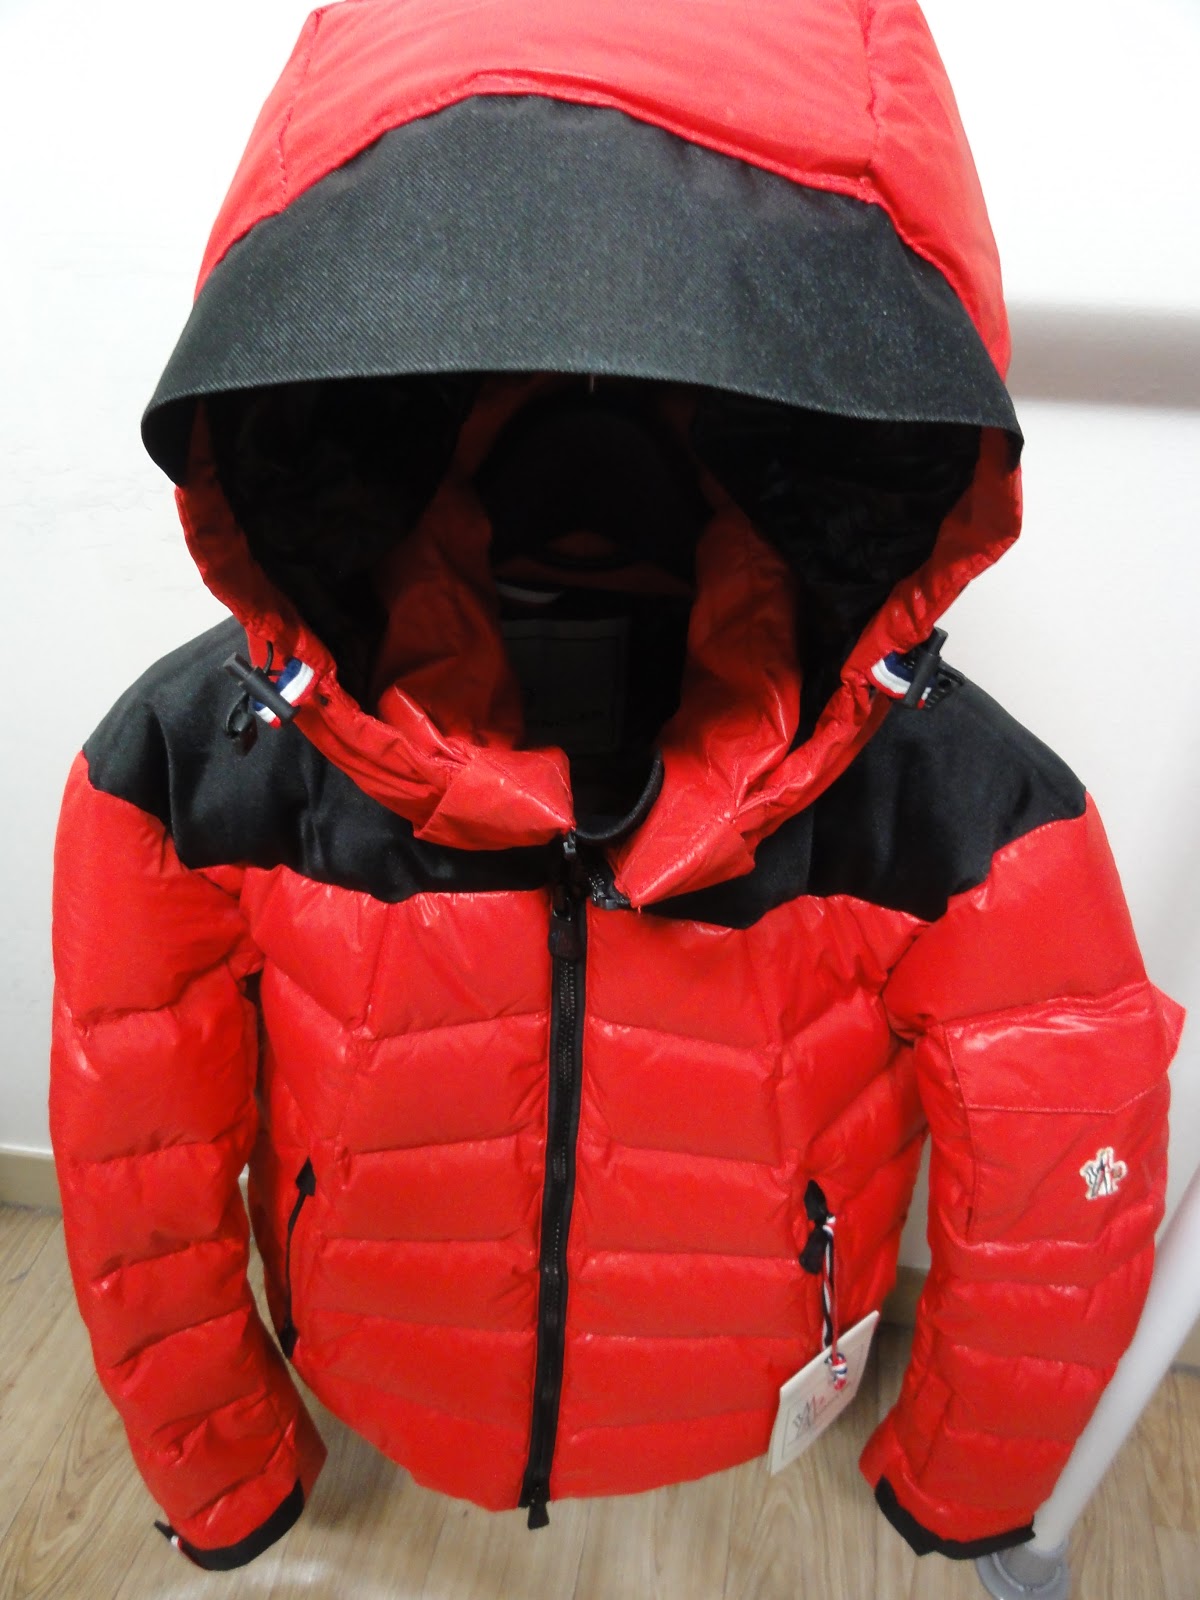 PSKPICTURE: Moncler（モンクレール）GRENOBLE SESTRIERE ダウンジャケットRED 2